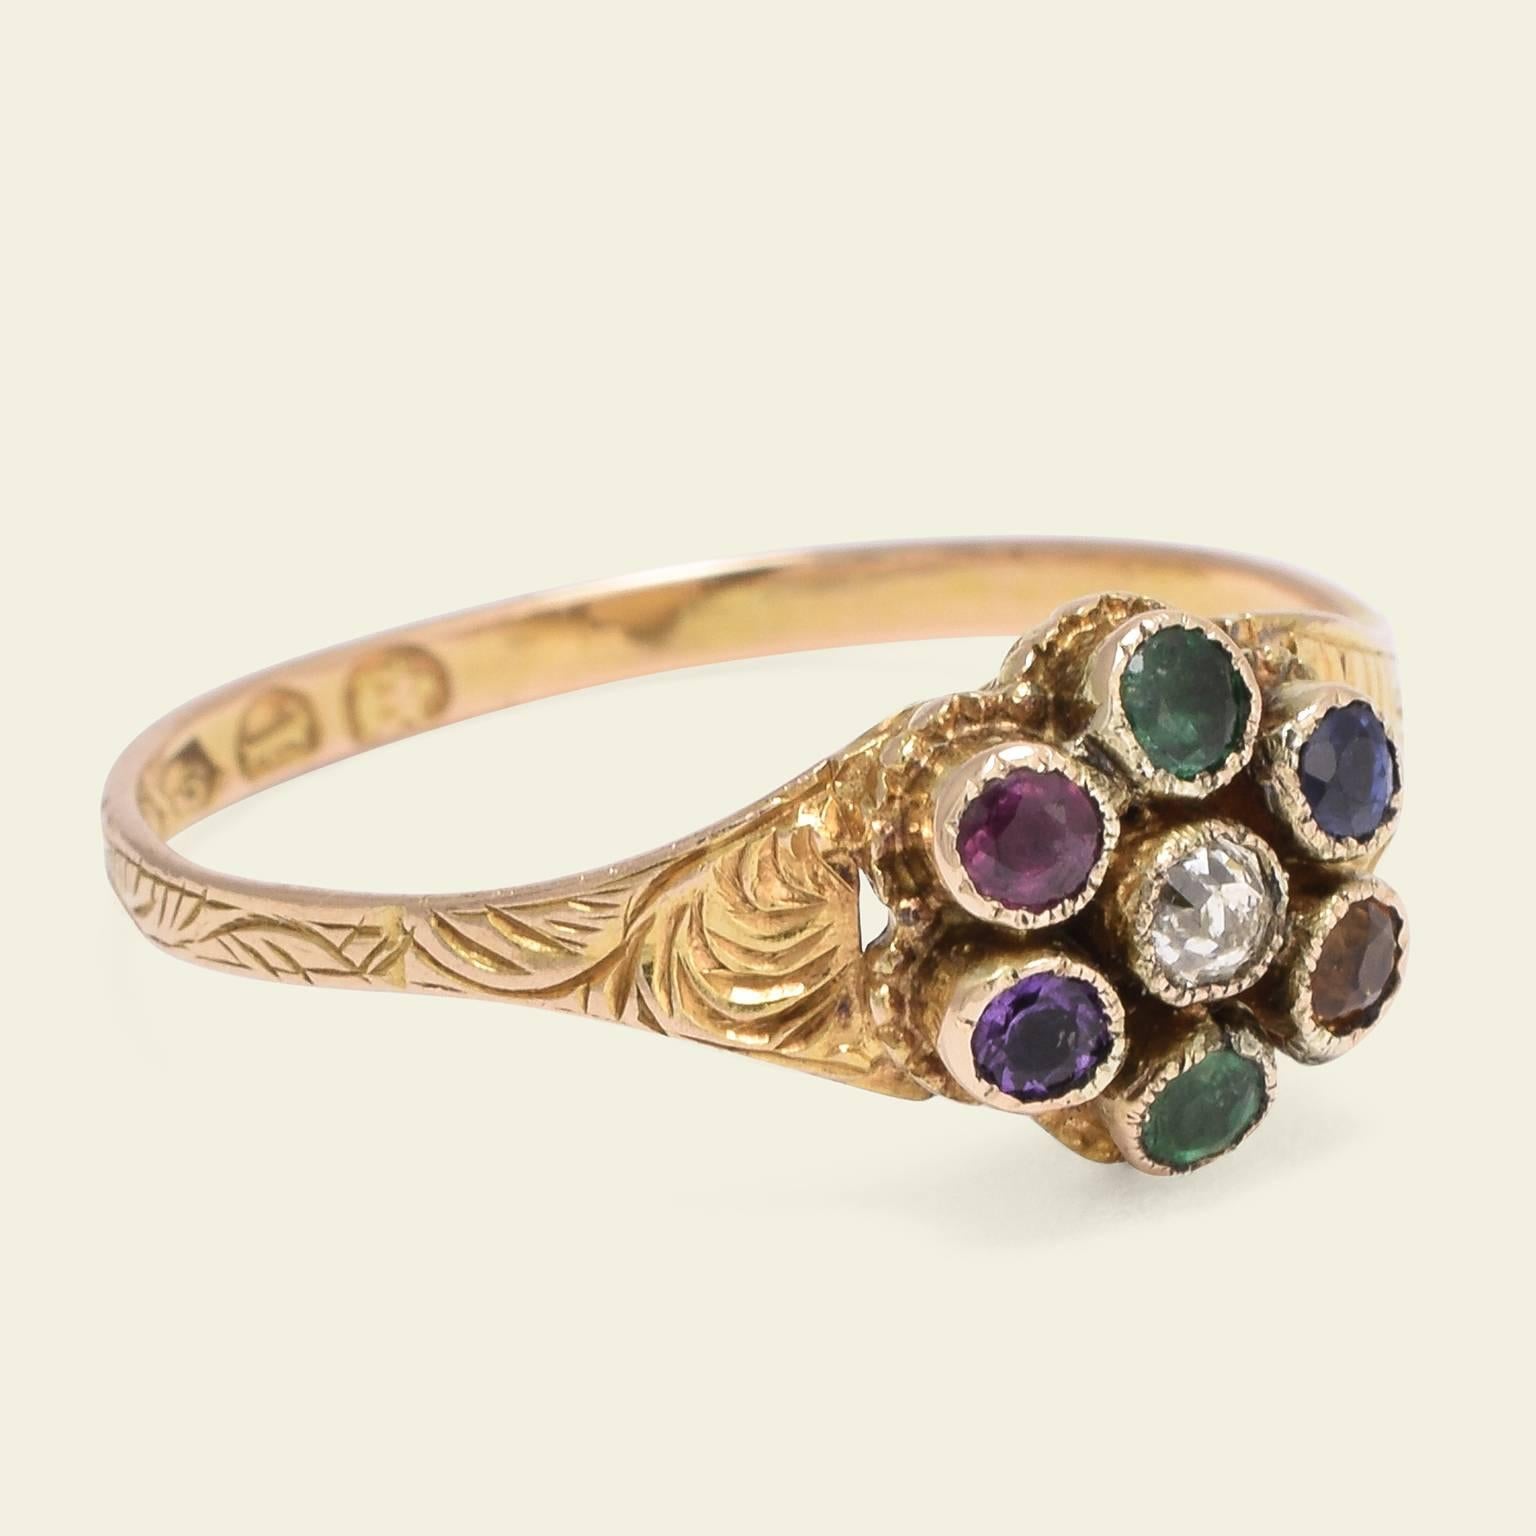 Acrostic rings like this one were beloved by the private and sentimental Victorians. The style first appeared in the early 19th century, and remained popular throughout the Civil War. Using precious gems, jewelers spelled out names and sweet